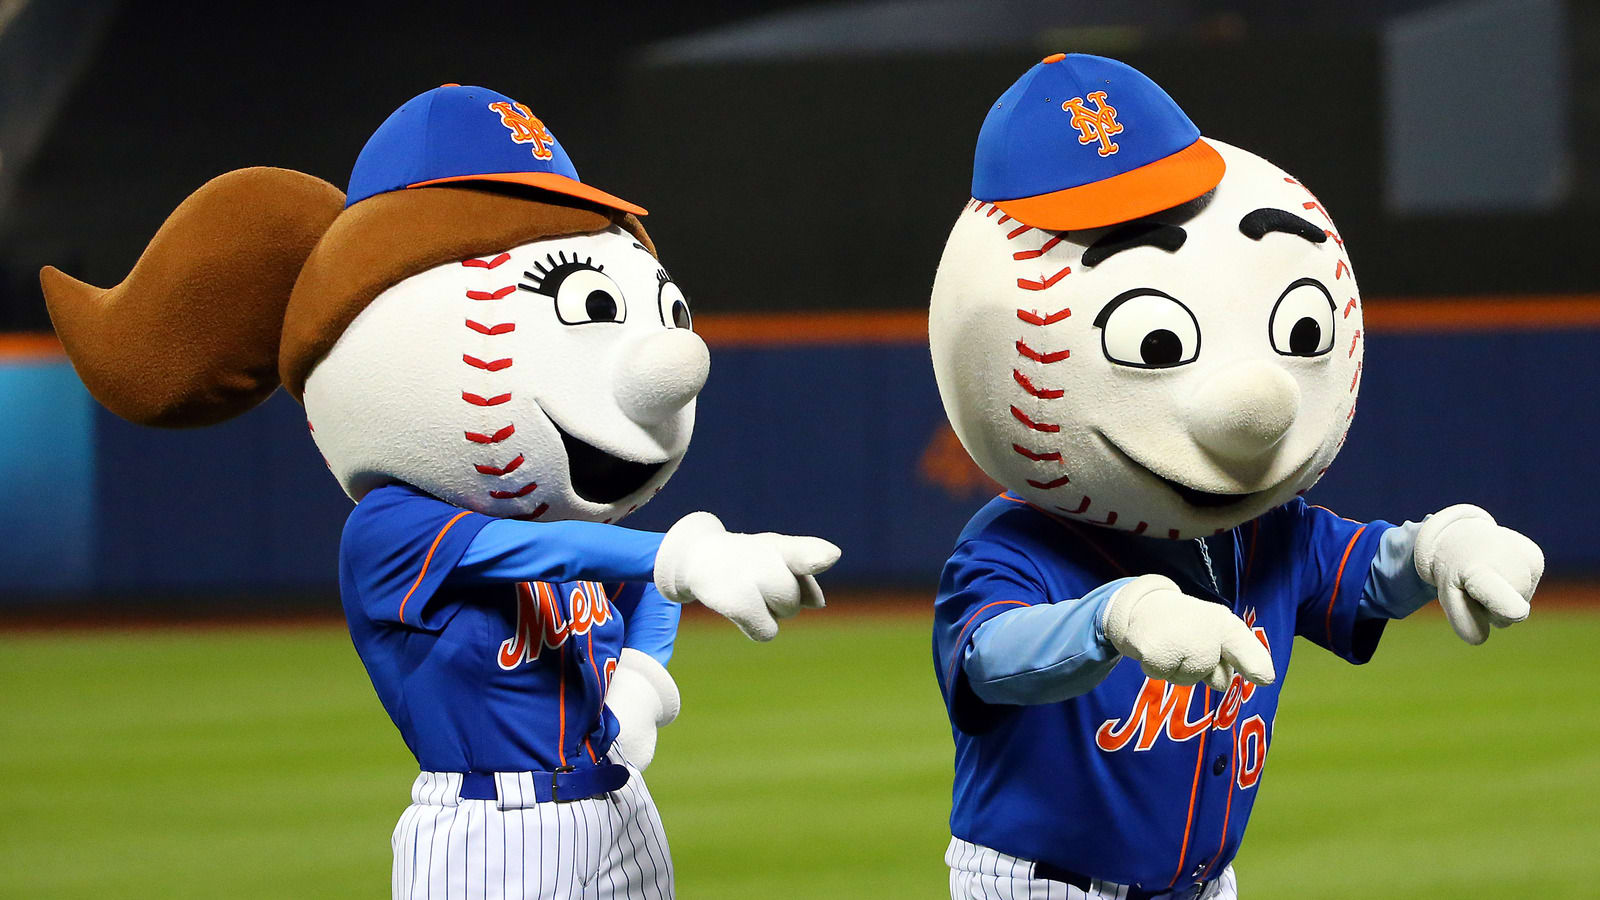 Multiple Baseball Mascots Claim To Have Affairs With Mrs. Met